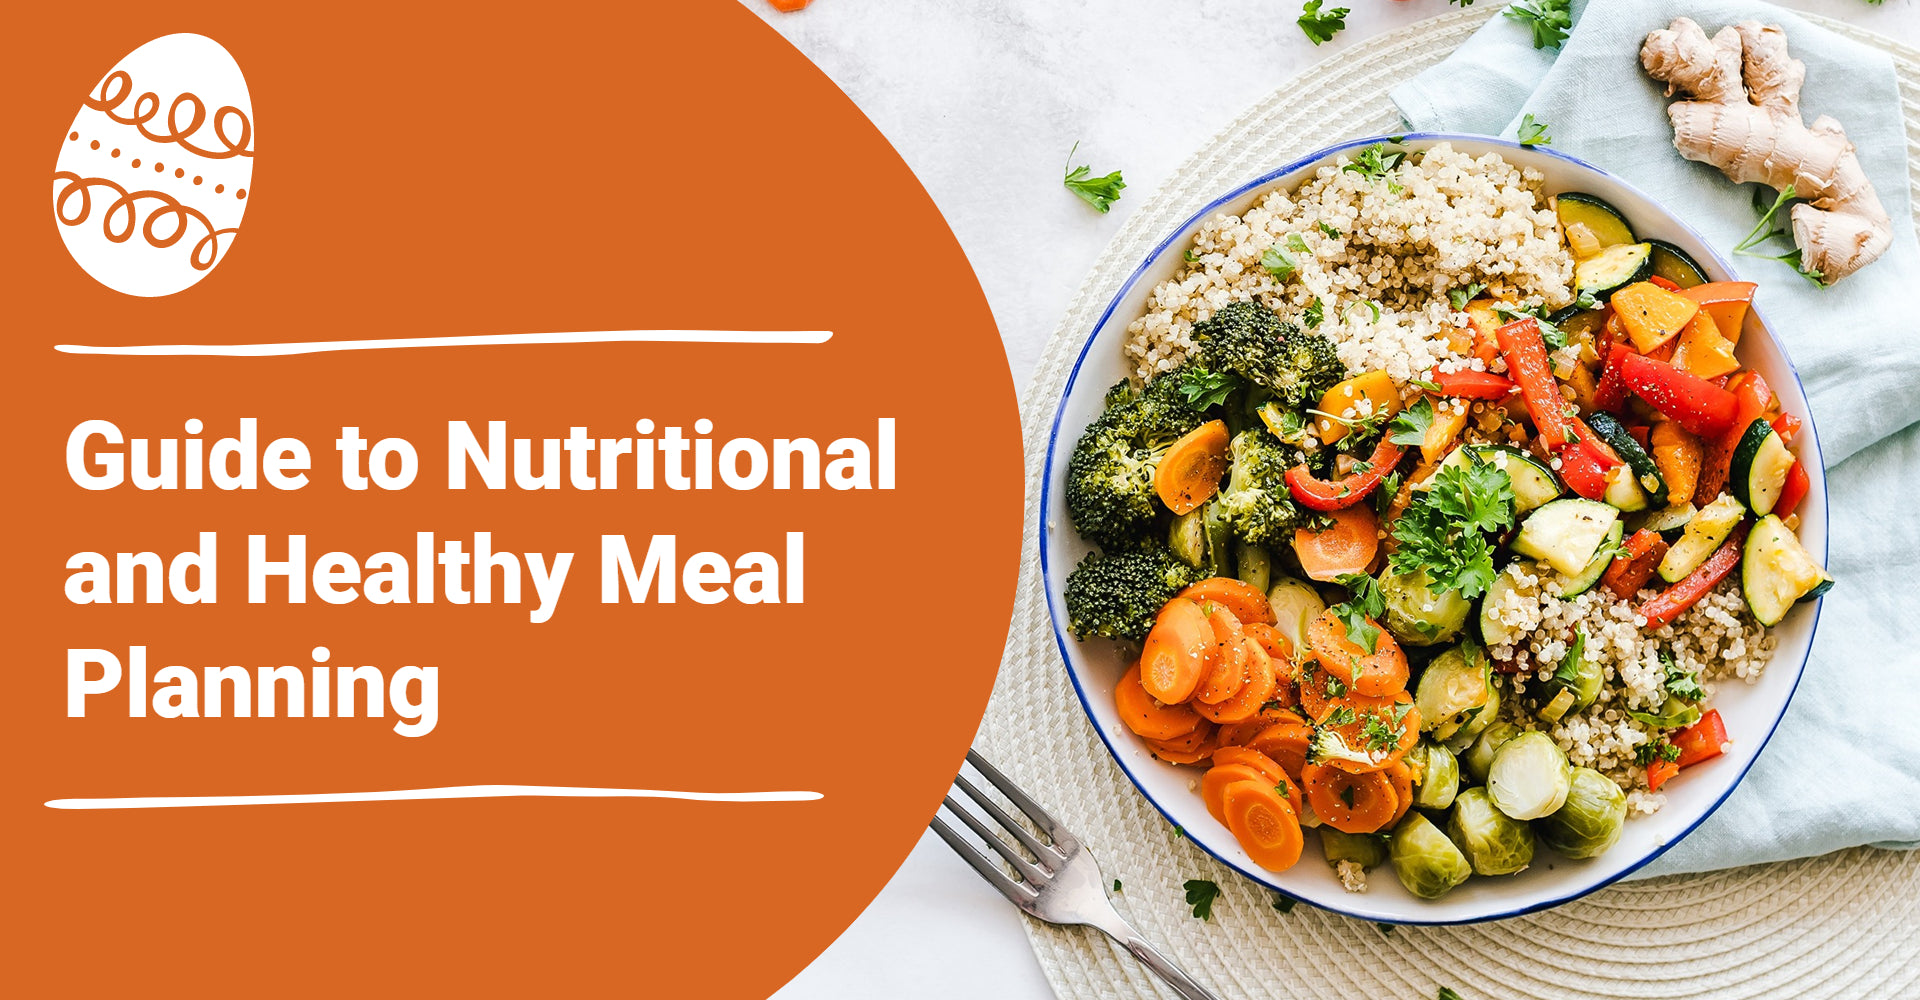 Guide to Nutritional and Healthy Meal Planning